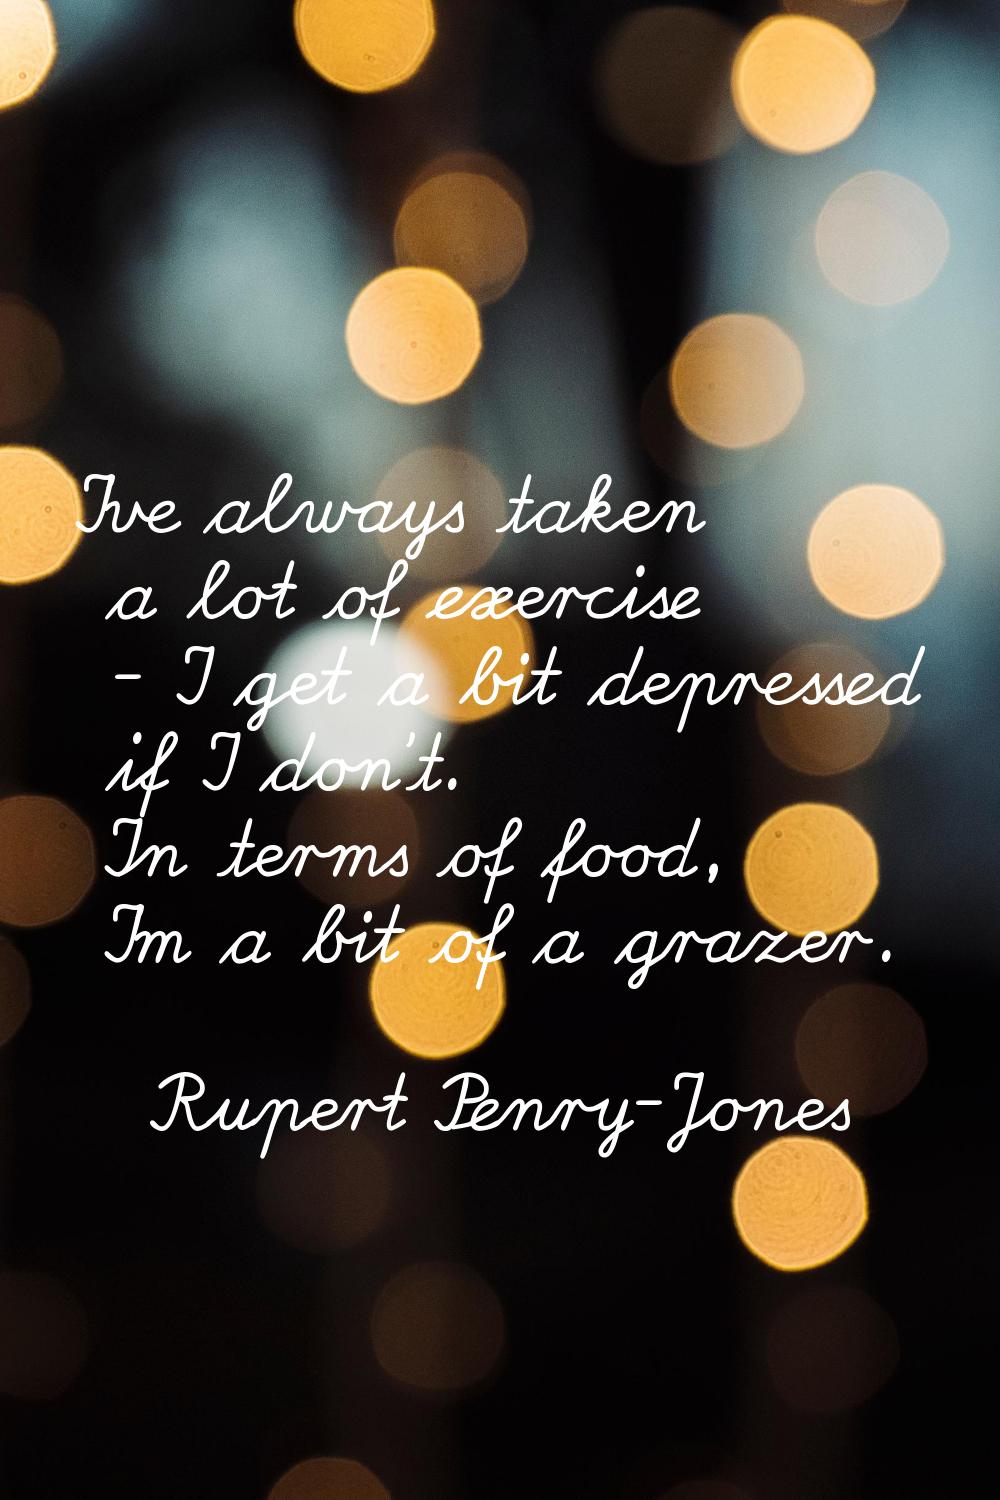 I've always taken a lot of exercise - I get a bit depressed if I don't. In terms of food, I'm a bit